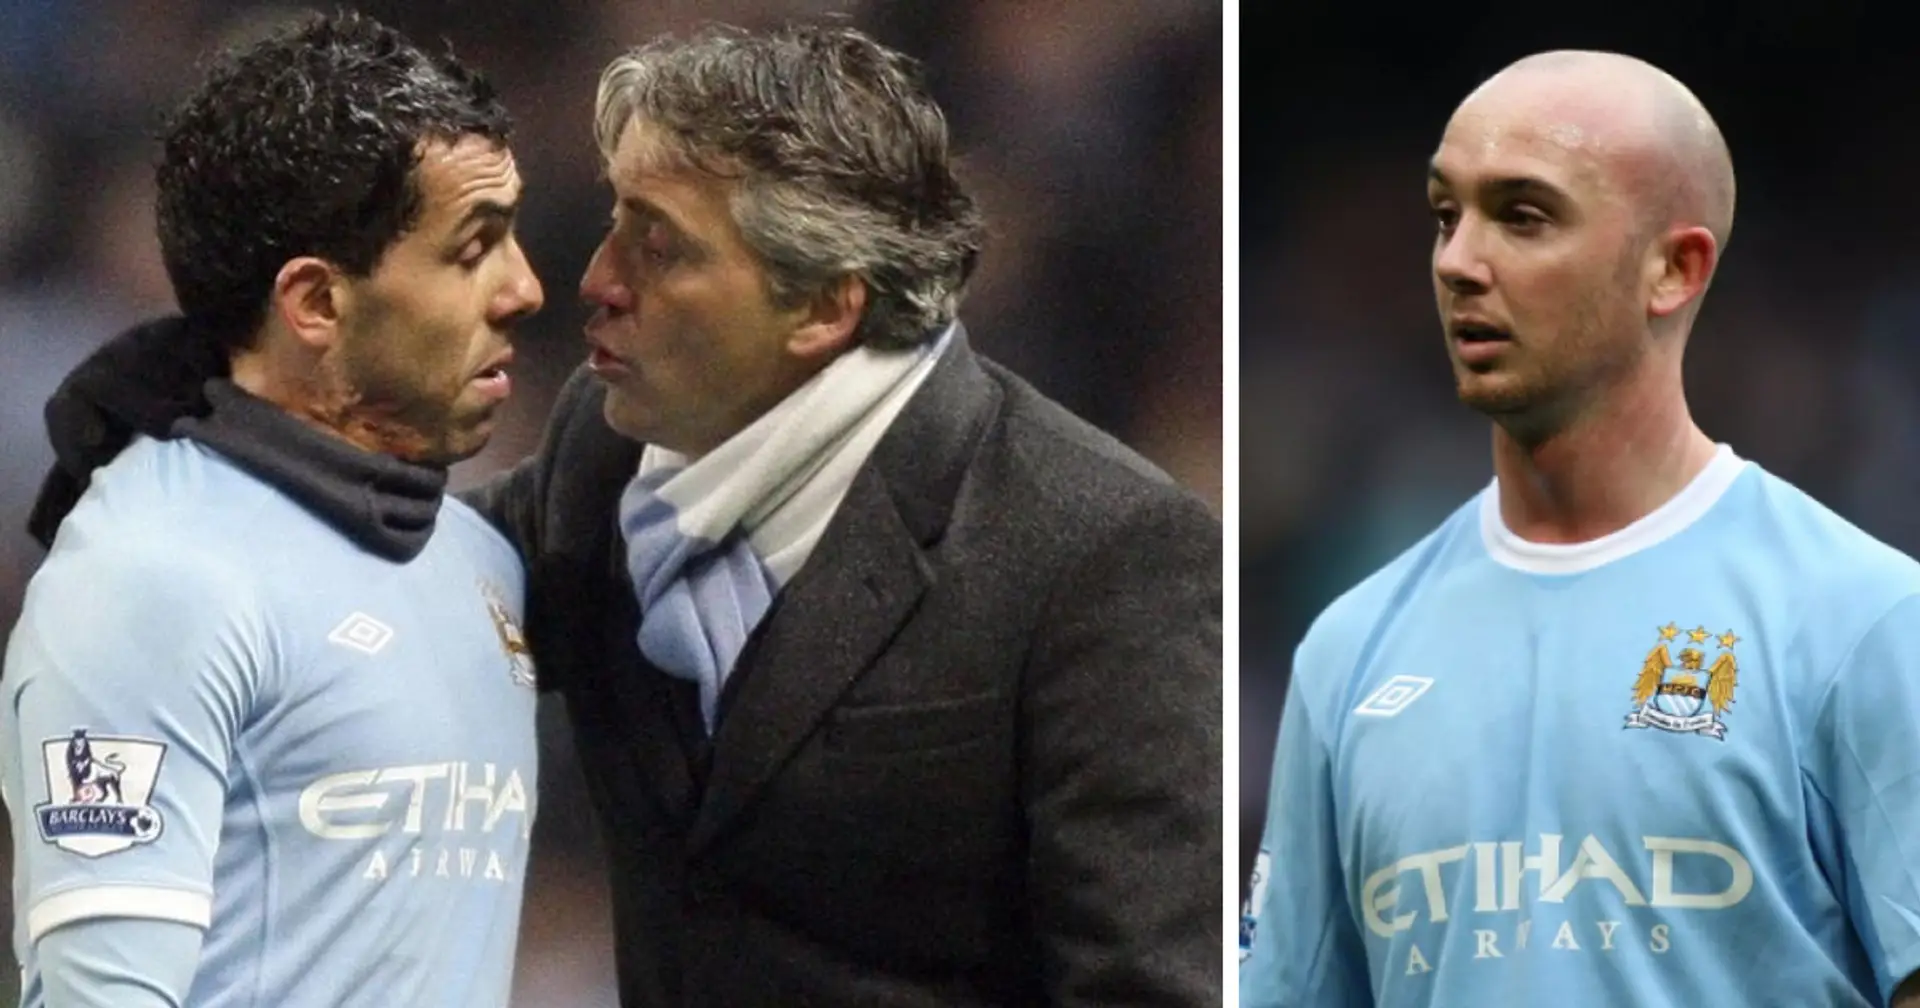 'Tevez lost it at him': Former Manchester City midfielder revealed Carlos Tevez almost had a fight with Mancini